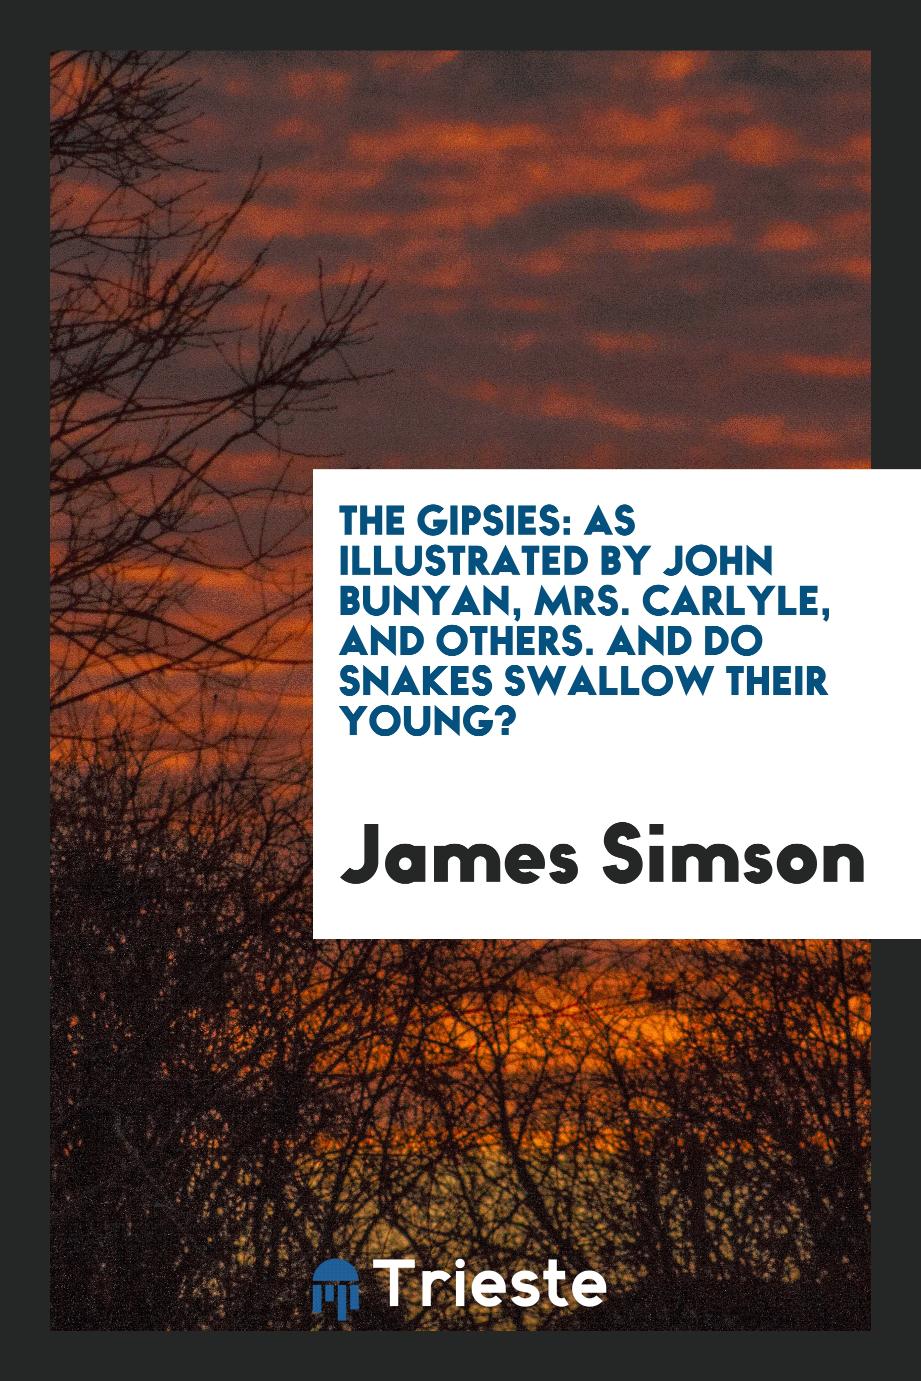 The Gipsies: As Illustrated by John Bunyan, Mrs. Carlyle, and Others. And Do Snakes Swallow Their Young?